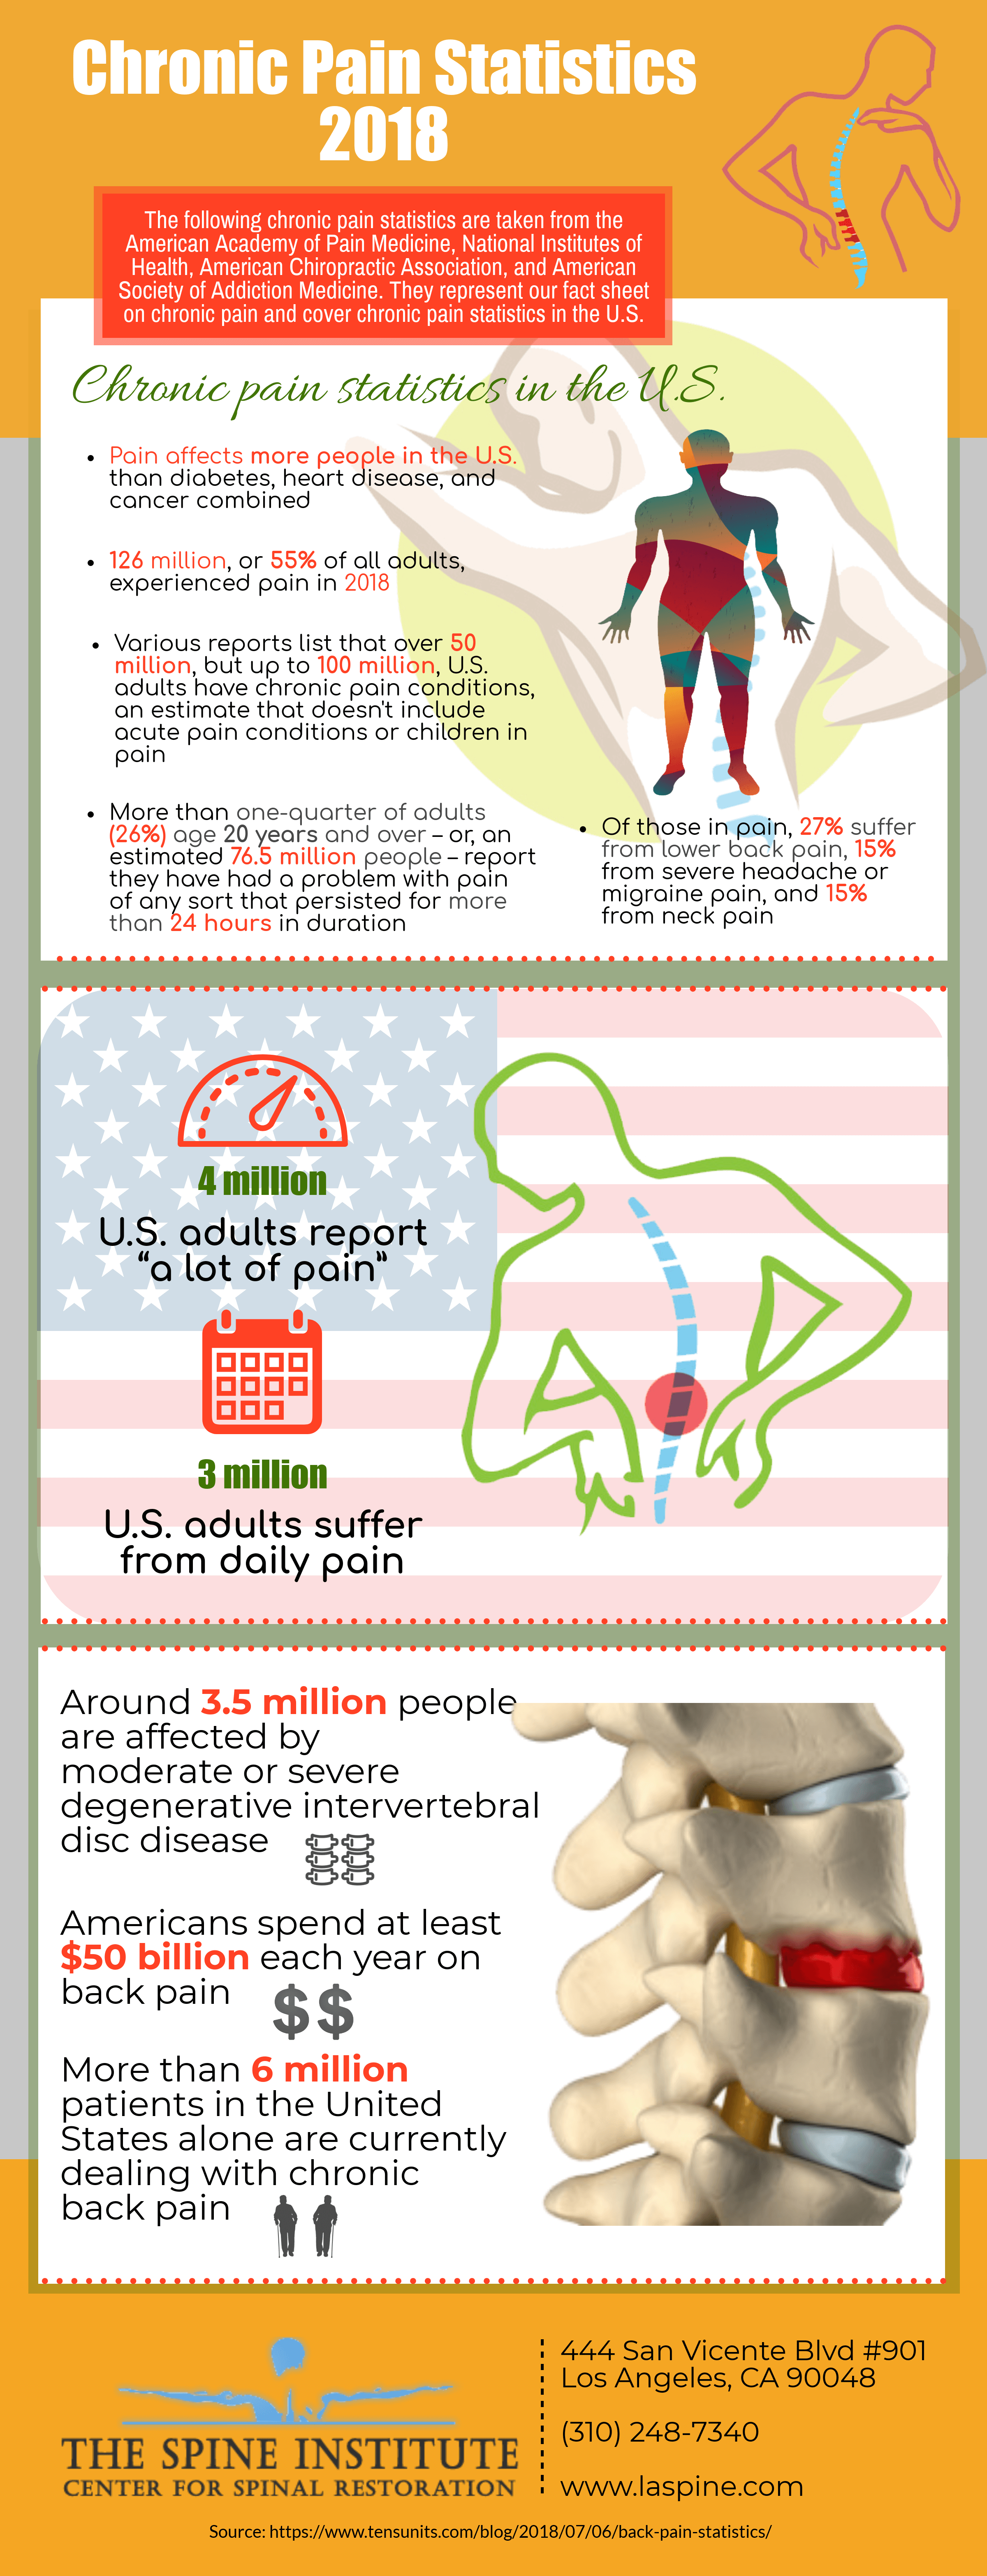 Important 2018 Statistics Related to Chronic Pain